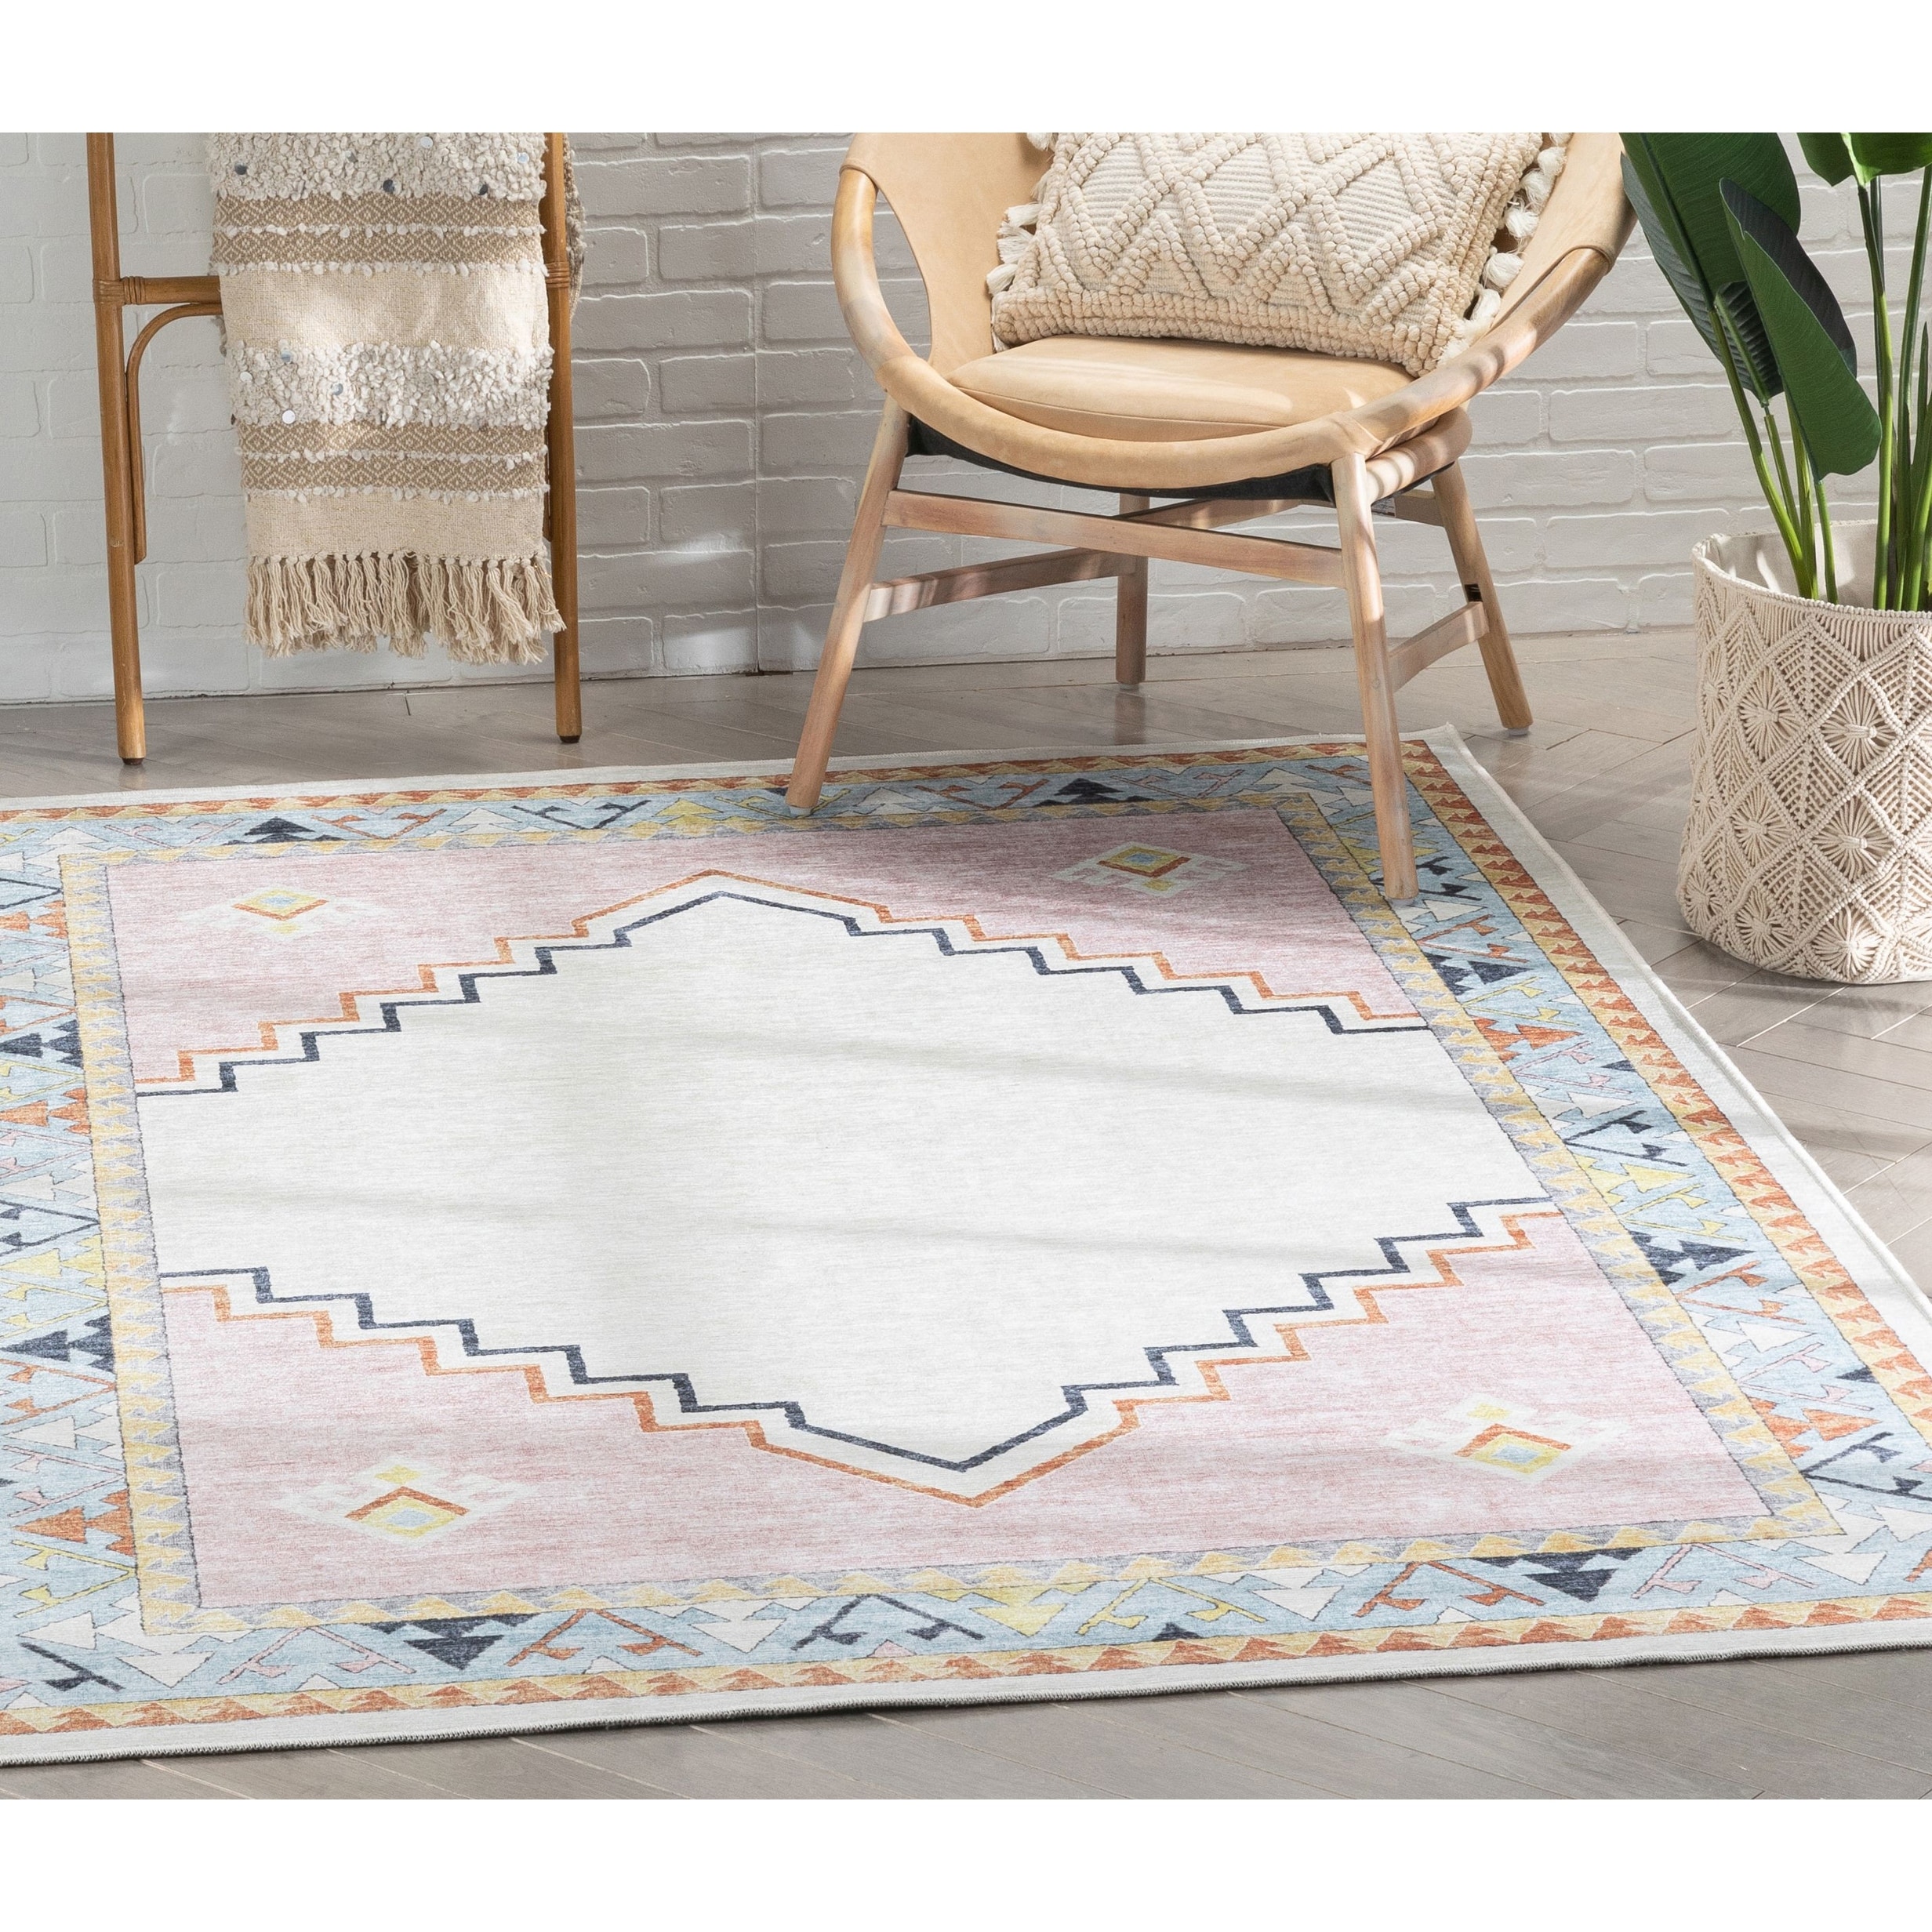 https://ak1.ostkcdn.com/images/products/is/images/direct/41a3a72f9a96dc3ee8c3679362e6982d66871469/Well-Woven-Kids-Rugs-Ethnic-Soft-Medallion-Modern-Machine-Washable-Area-Rug.jpg